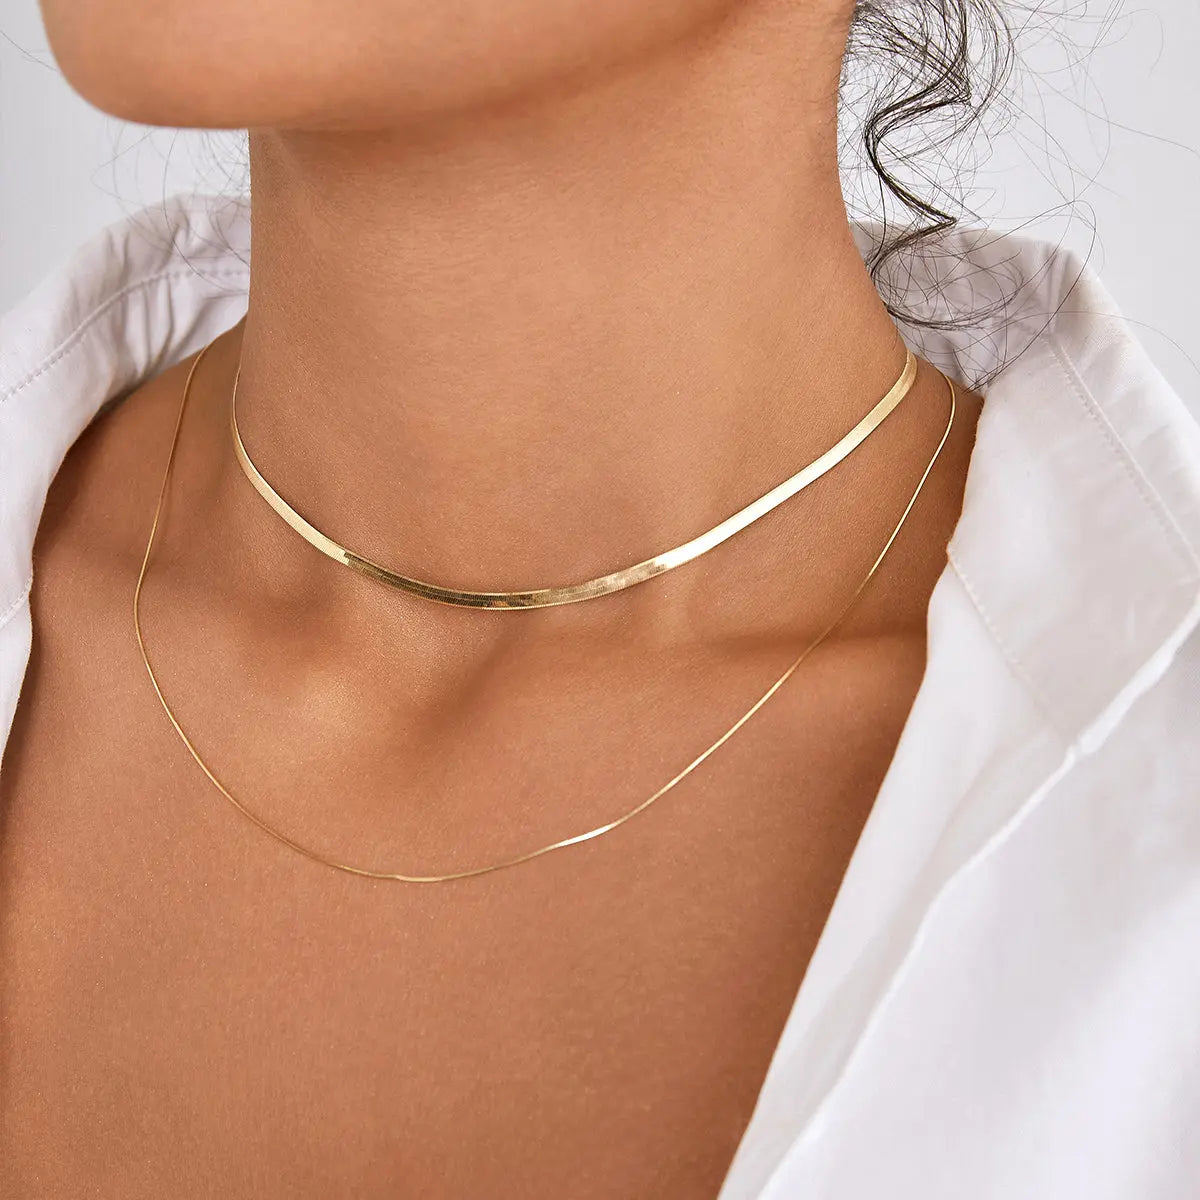 NEW IN : 18K Solid Gold Thick Snake Chain Our newest gemstone drop is here  to punch up your festive party looks ✨. Crafted with Solid G... | Instagram